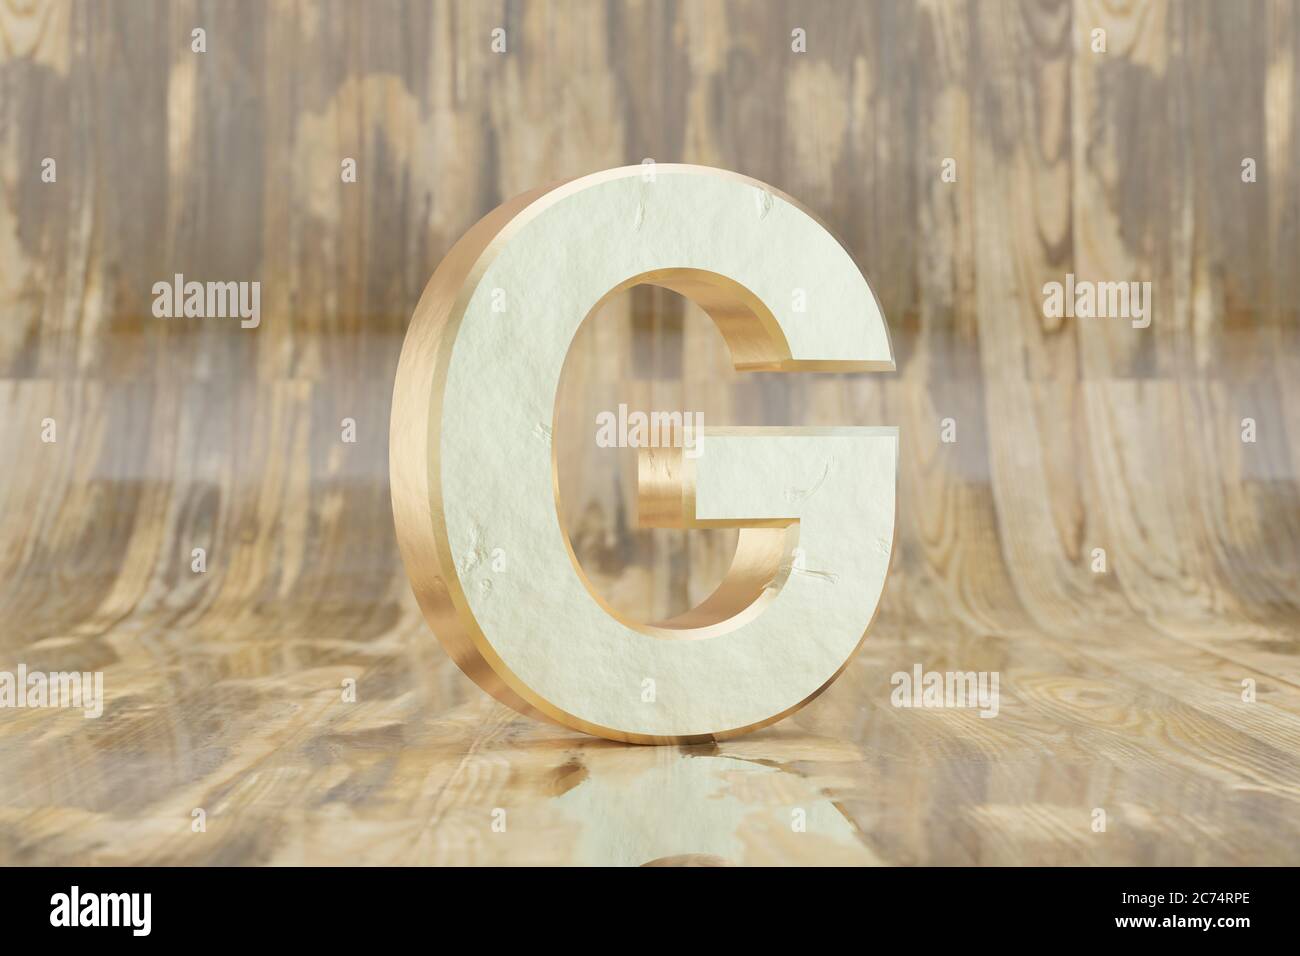 Gold 3d letter G uppercase. Golden letter on glossy wet wooden background. Golden alphabet with imperfections. 3d rendered font character. Stock Photo